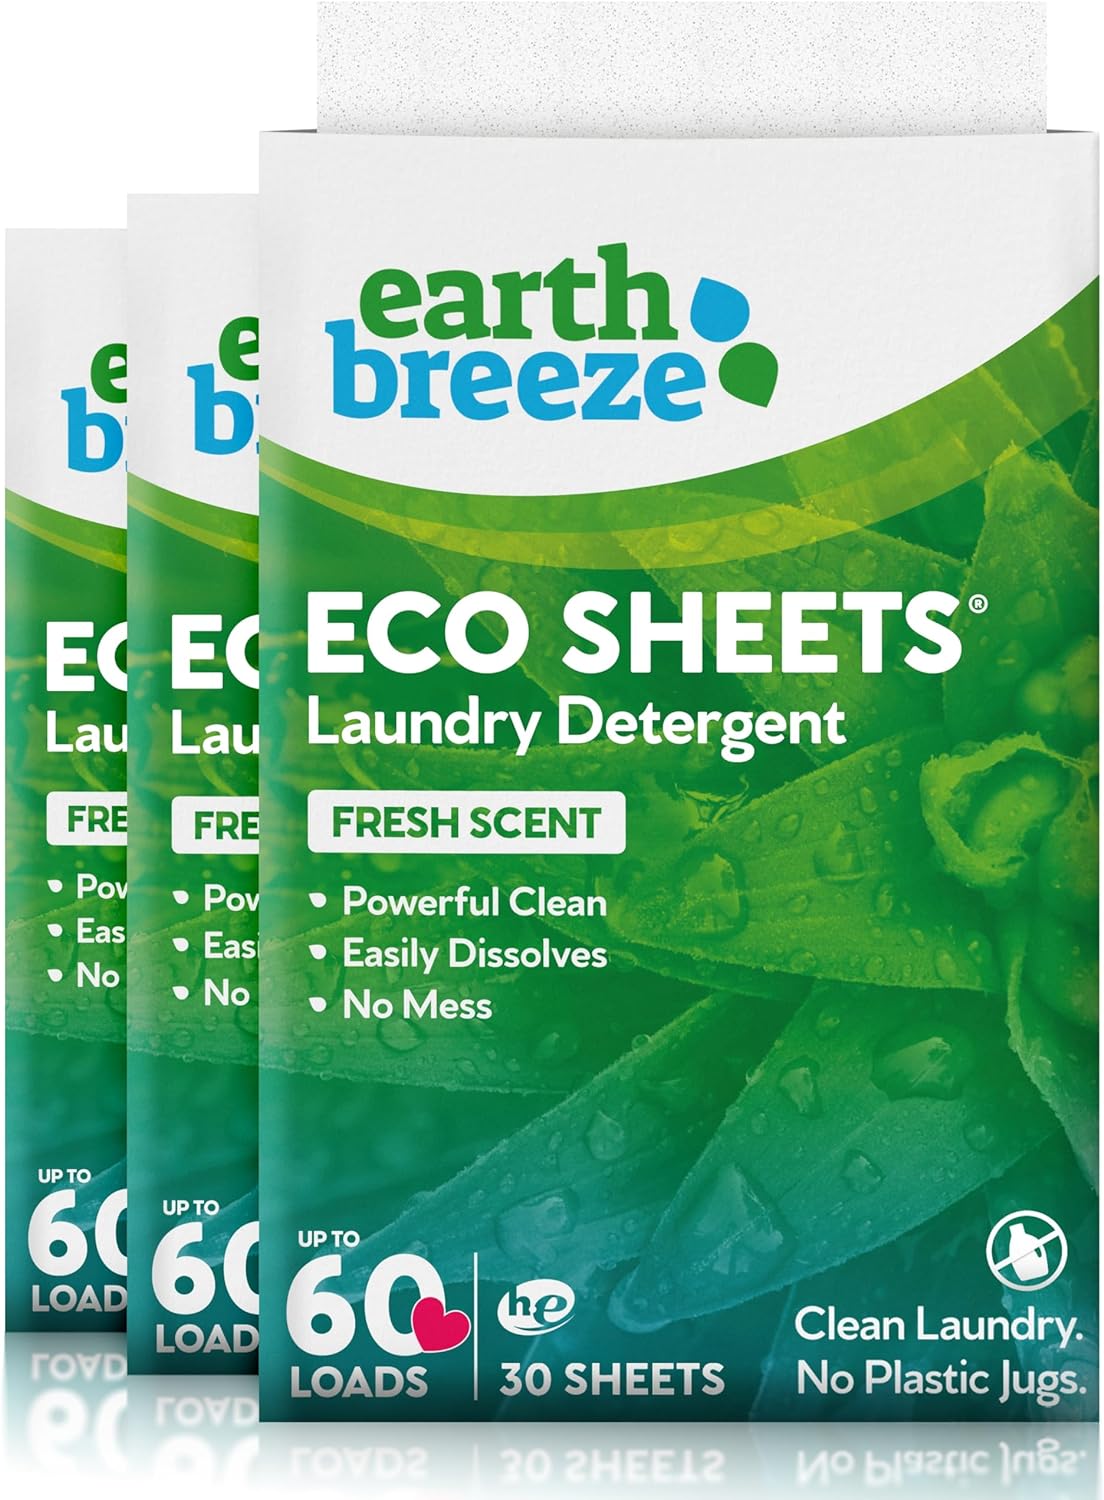 I love Earth Breeze! It is SO easy to use and it comes in a slim package for easy storage. I love that Im helping Earth by not buying another plastic container!This product works great and cleans my clothes thoroughly. I found that tearing it up and tossing it on the bottom of the washing machine before loading cloths works best. The company ships a new package timely, so Im never without soap. The soap has a pleasant fragrance as well and it never smells harsh or bleachy.I love this product!